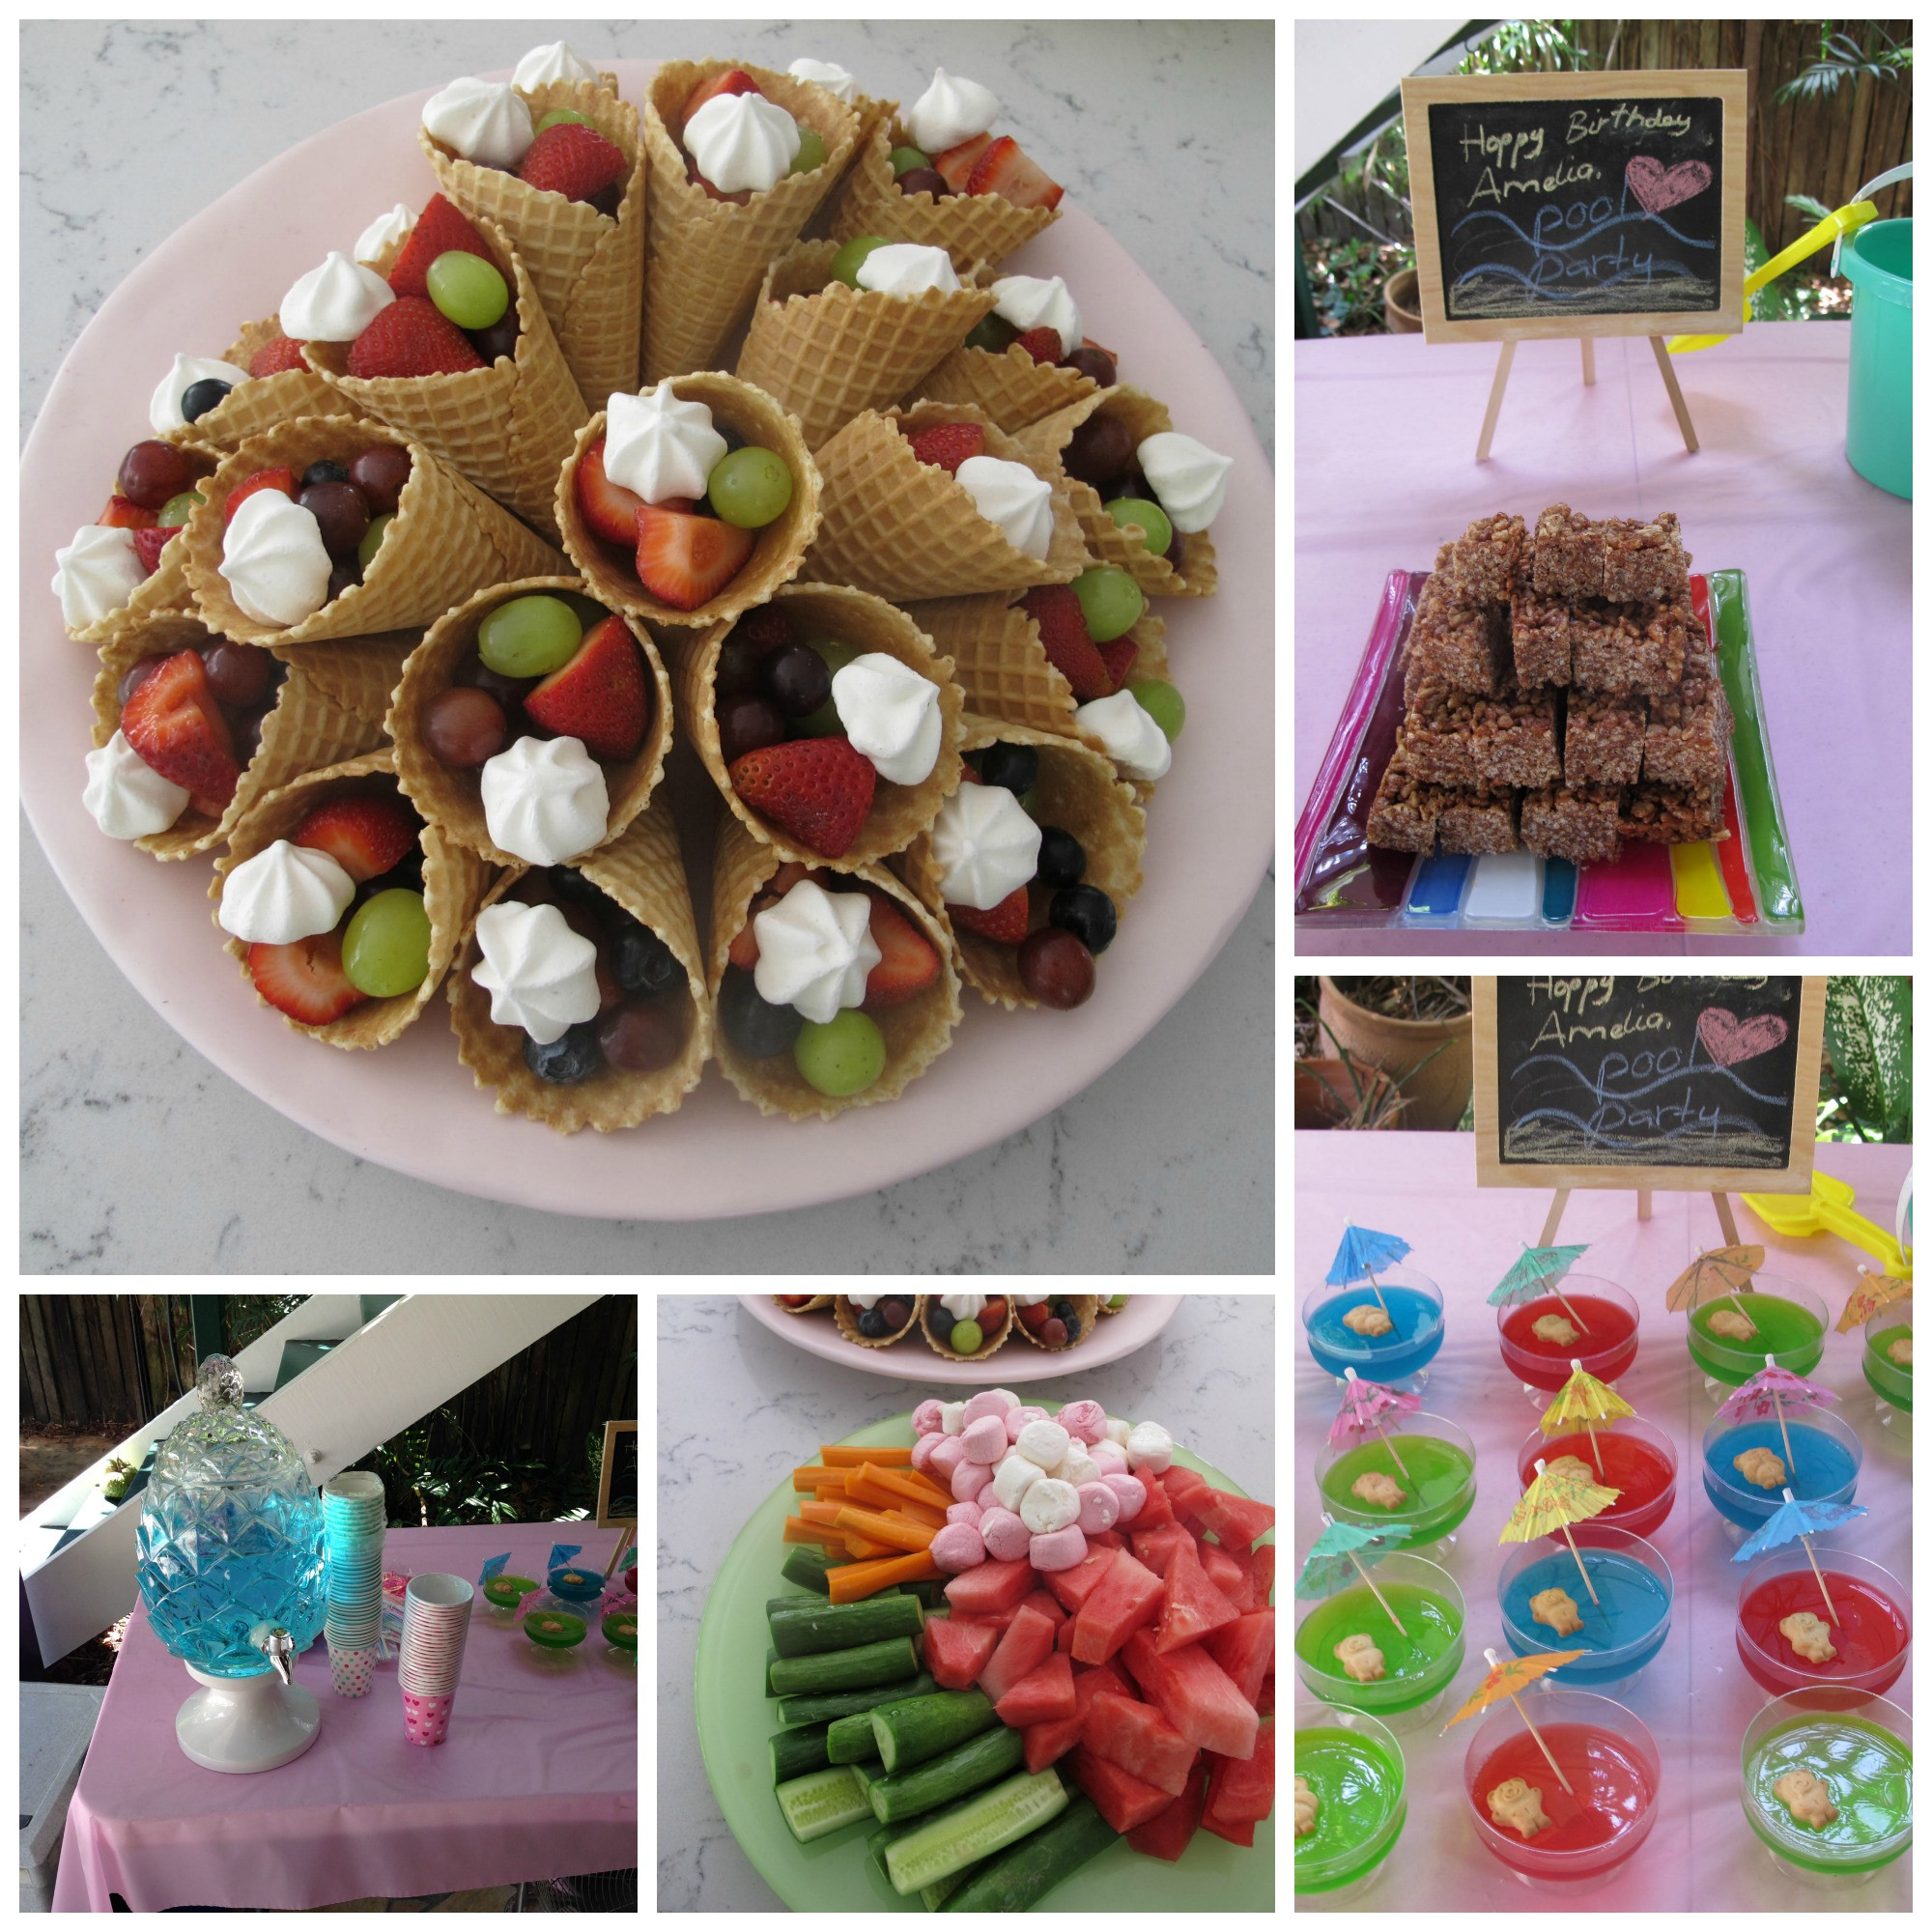 Pool Party Menu Ideas
 Birthday Pool Party Tips Tricks and Cake hint have